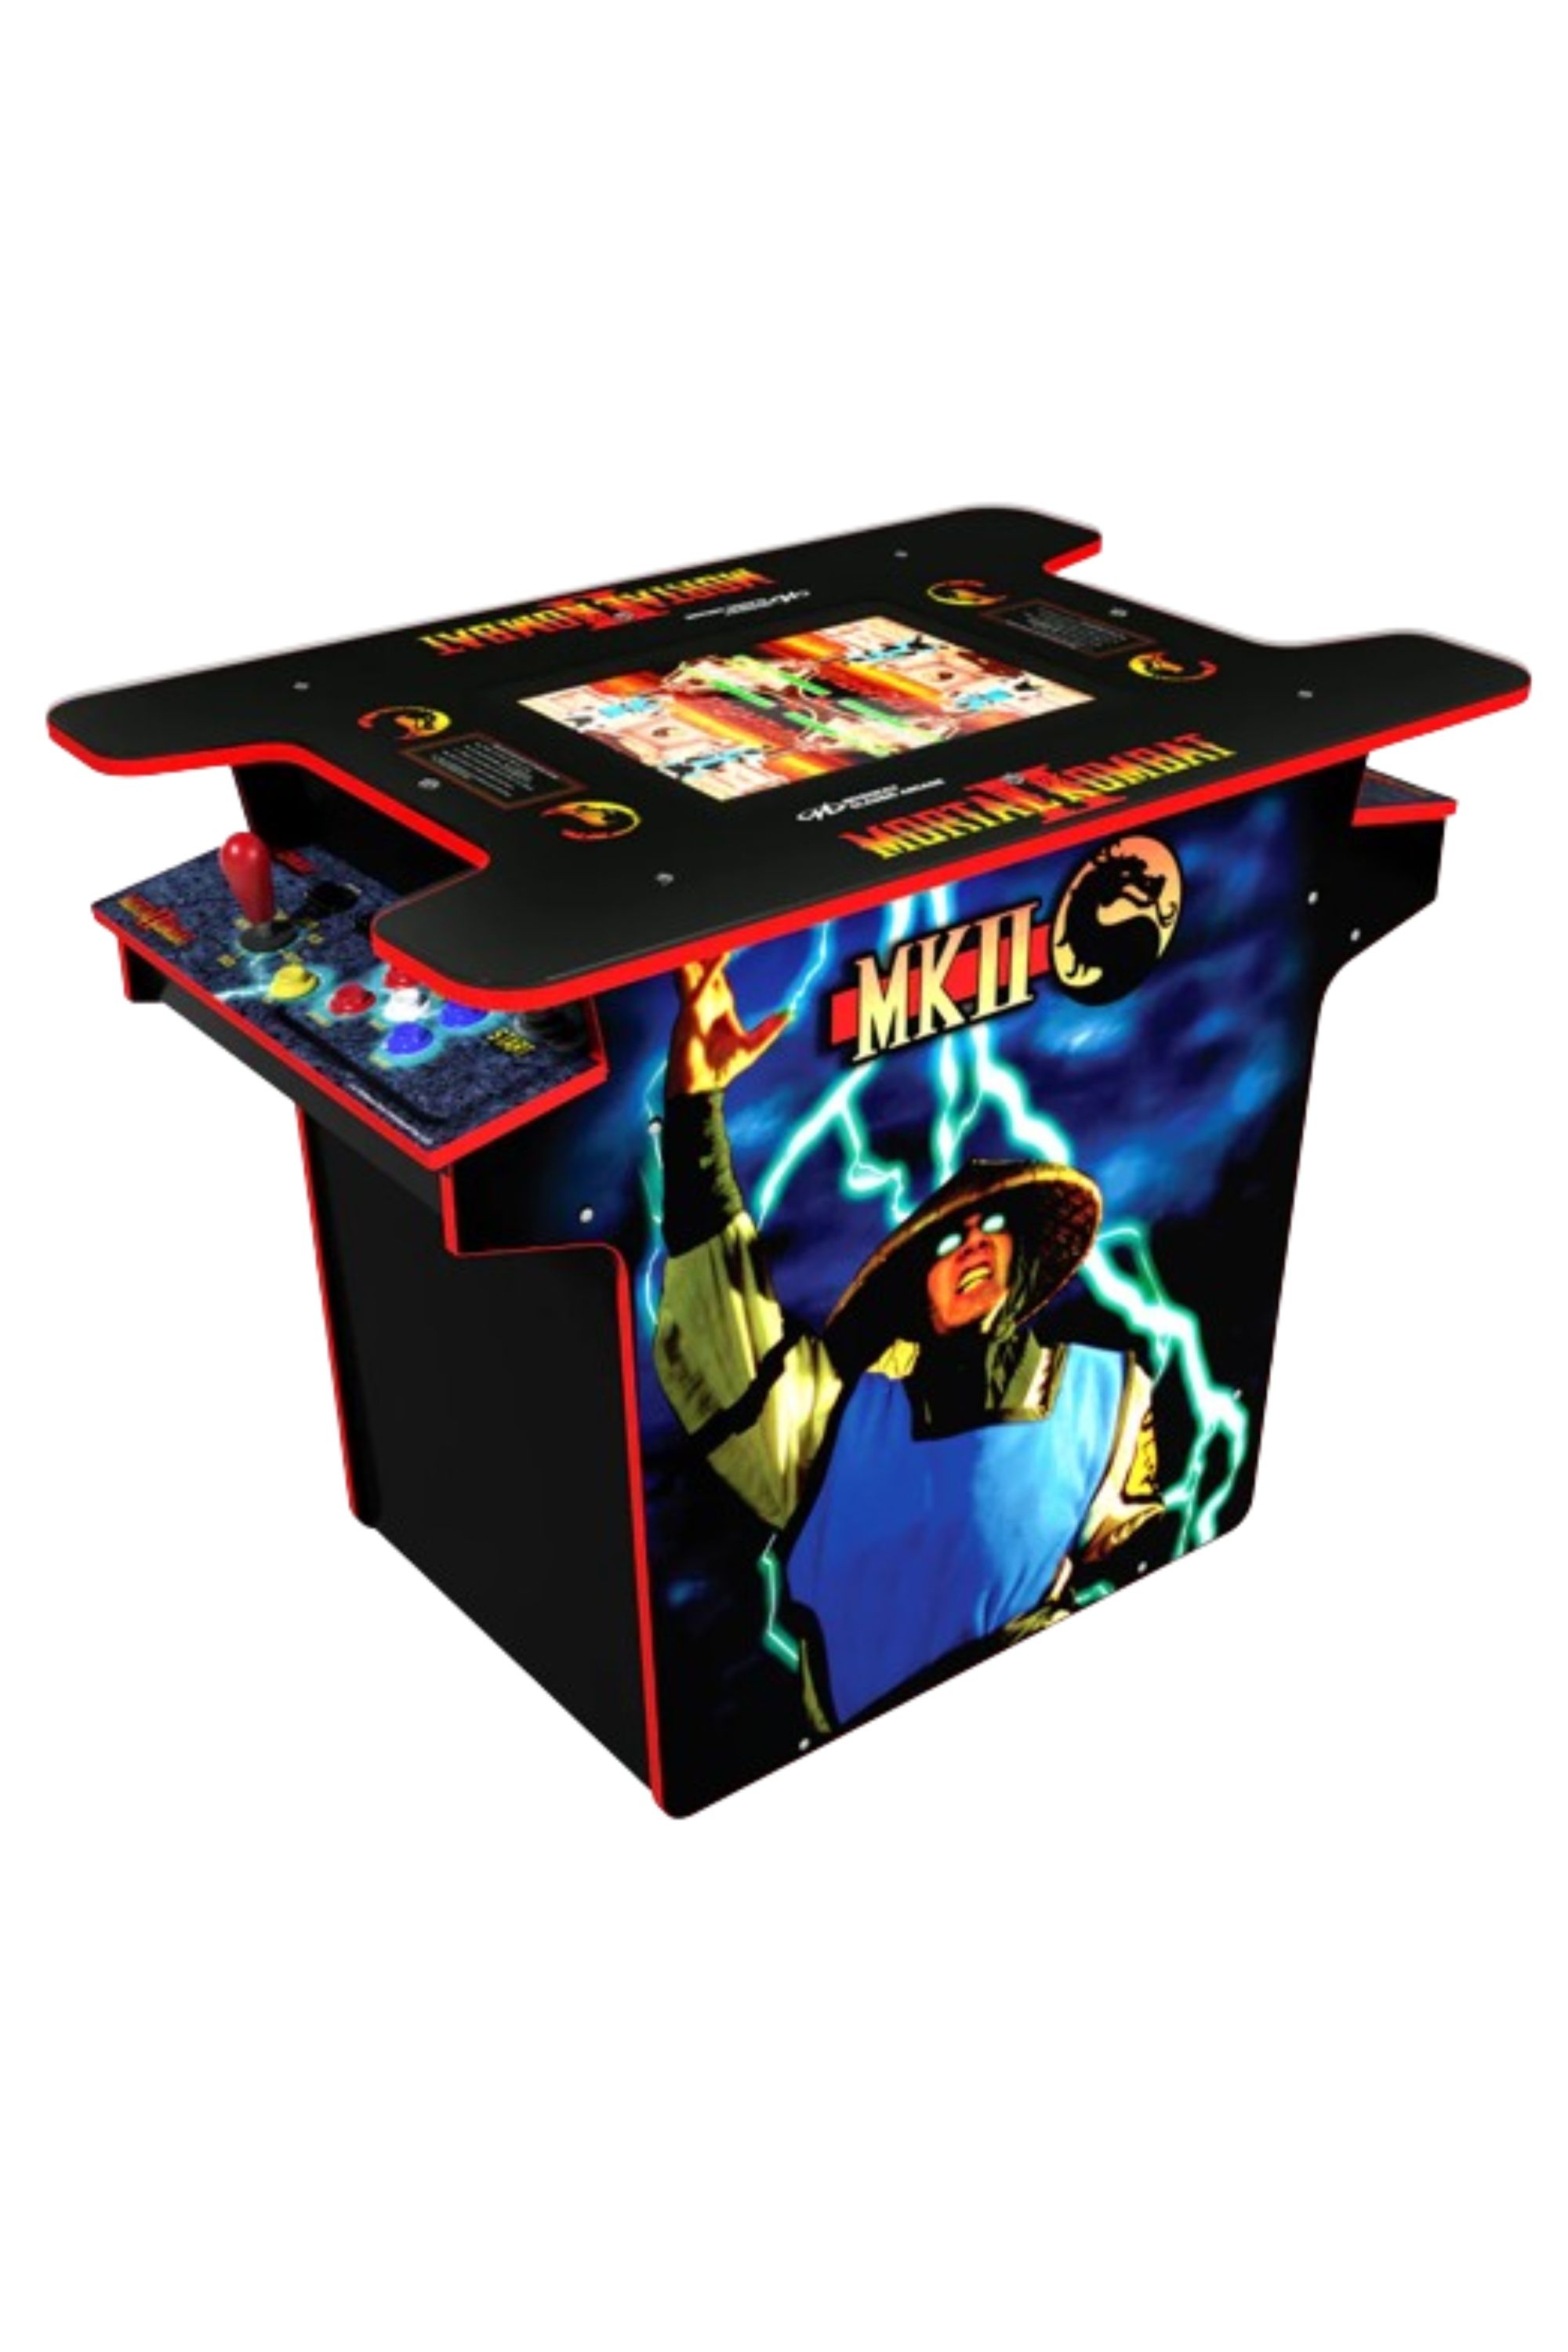 Arcade1Up Midway Mortal Kombat Gaming Table For 2-players